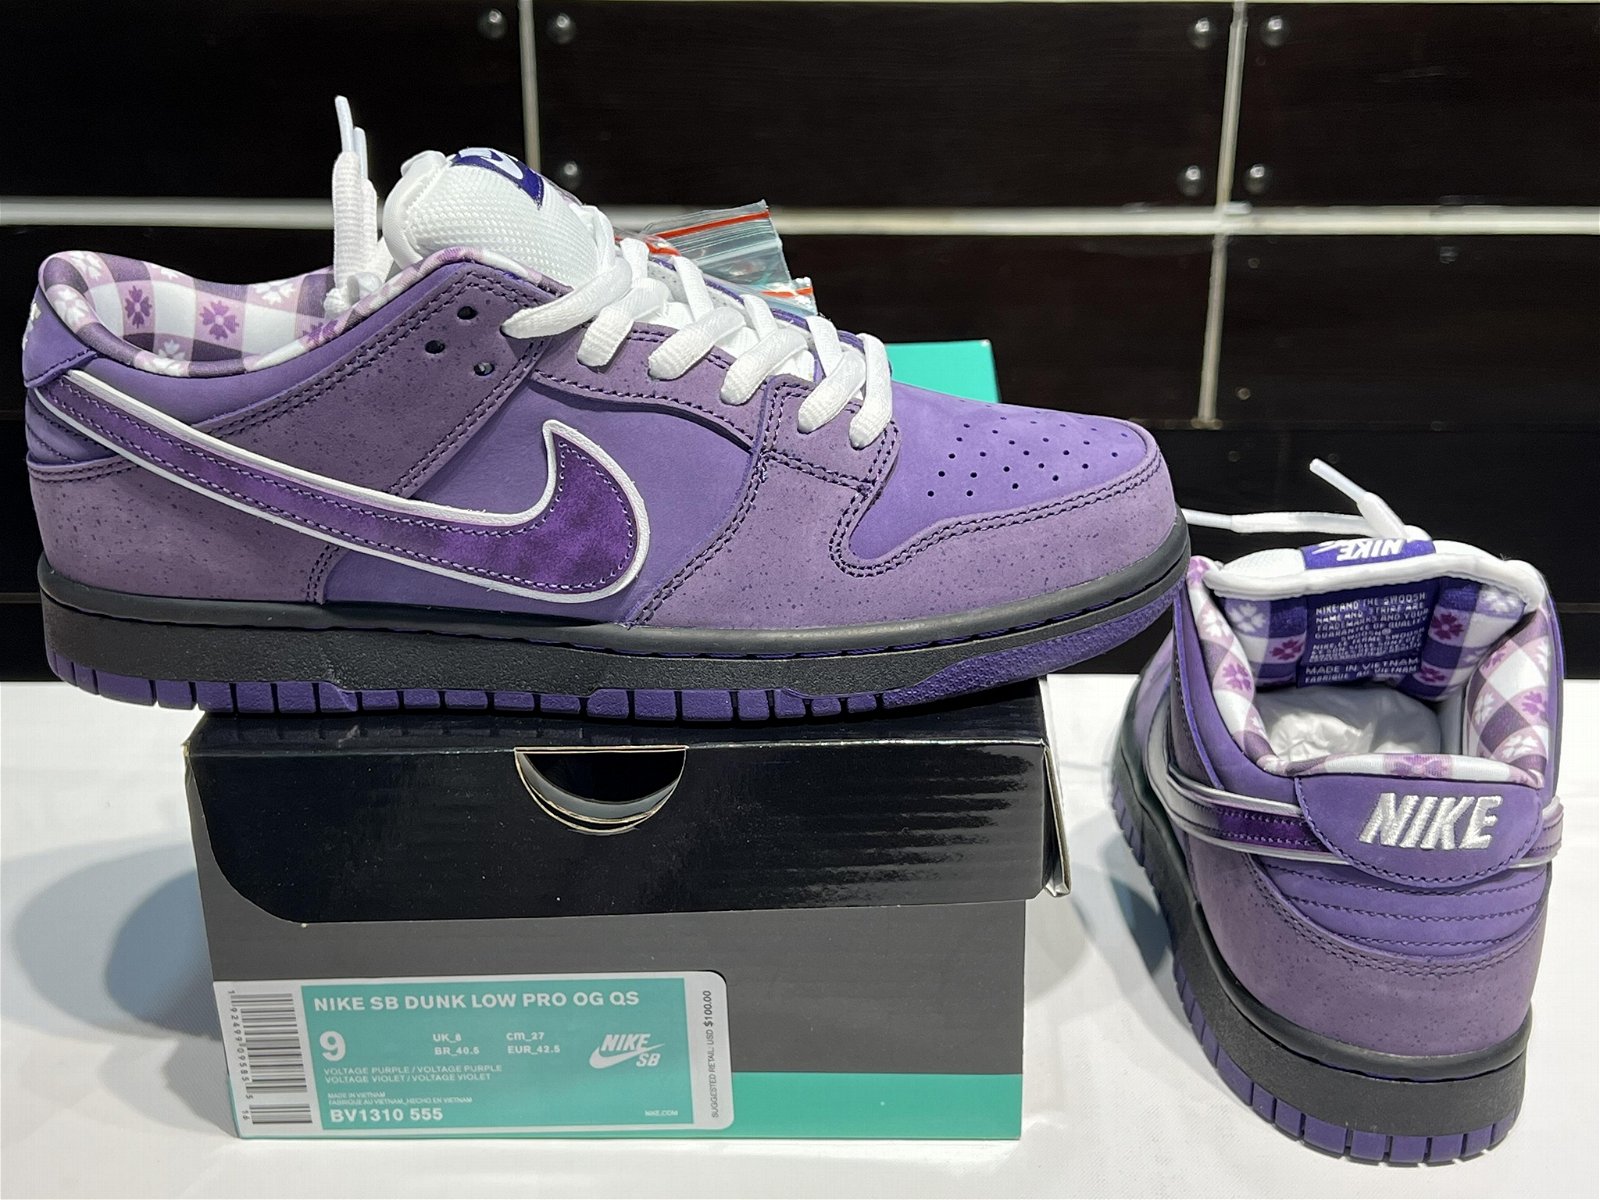 Concepts X      SB Dunk ''Purple Lobster "Recreational sports skateboard shoes 5